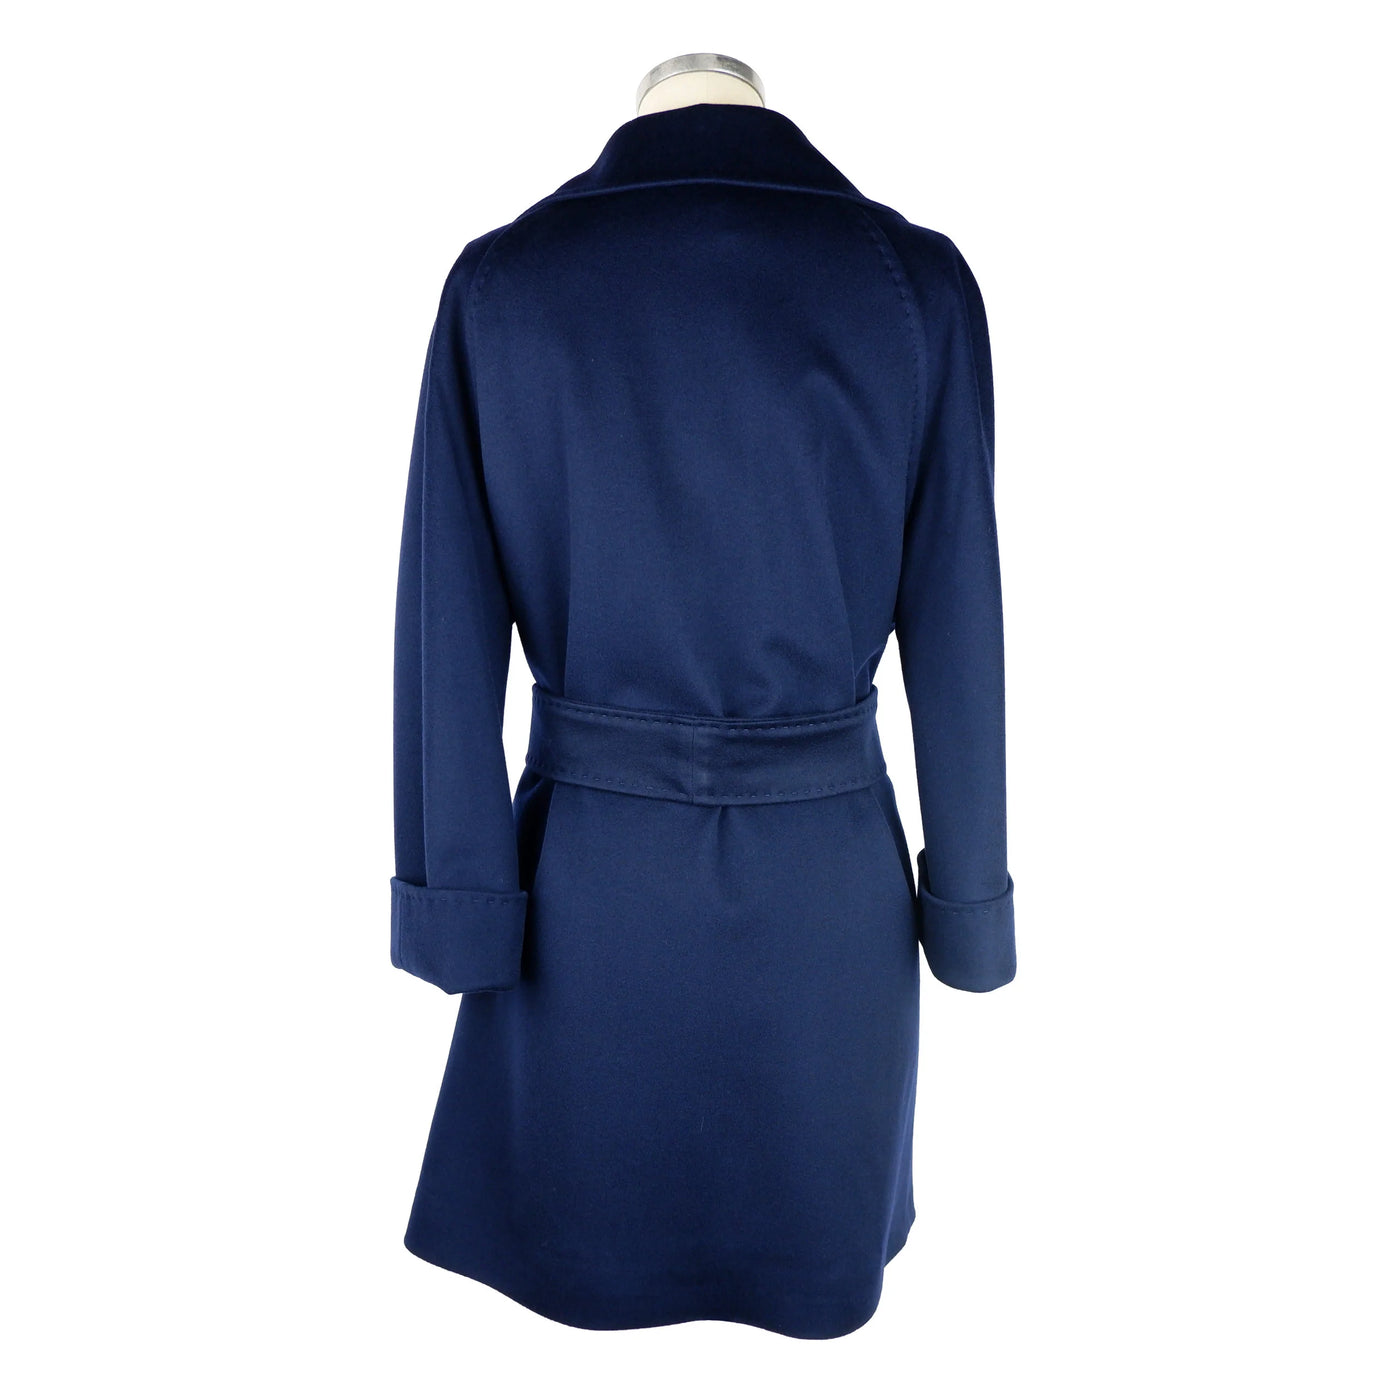 Made in Italy Blue Wool Jackets & Coat Blue, feed-1, IT40|S, IT42|M, IT44|L, IT46 | L, Jackets & Coats - Women - Clothing, Made in Italy at SEYMAYKA